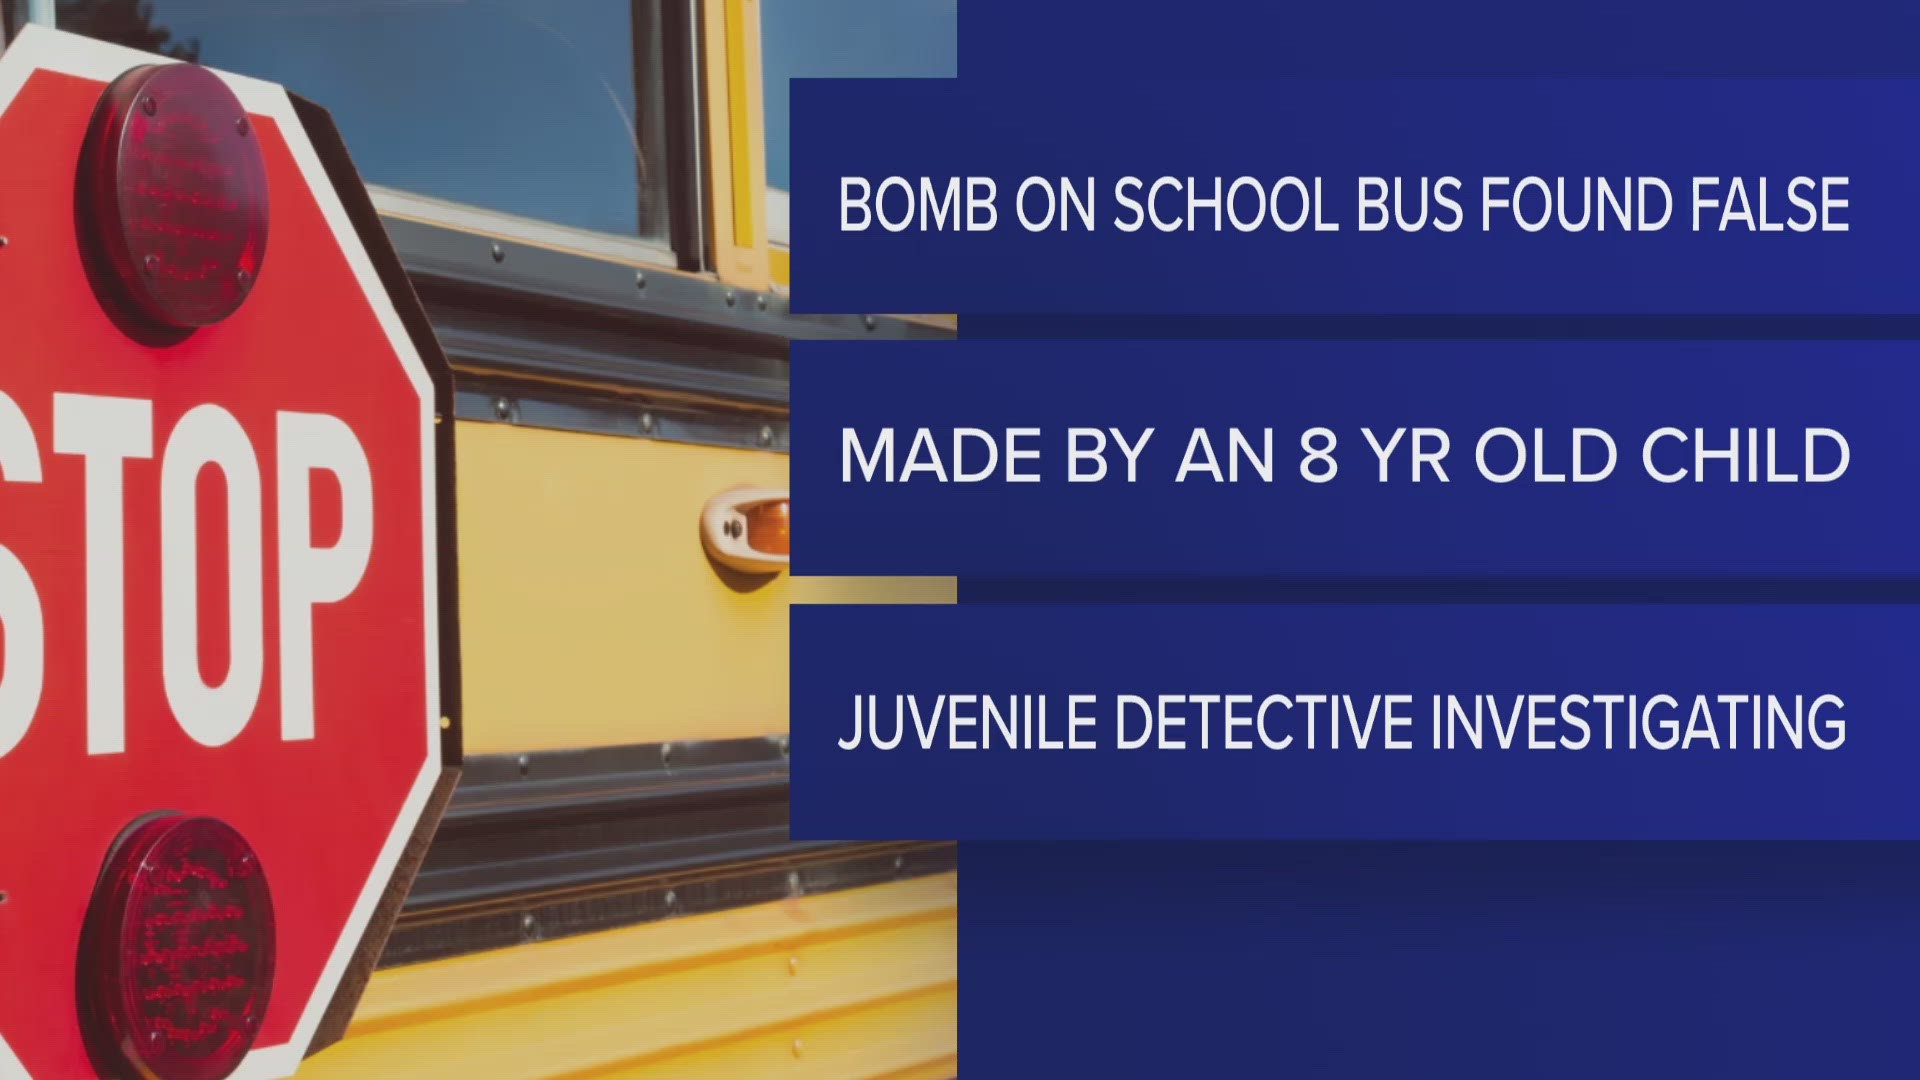 GENESEE COUNTY 9-1-1 DISPATCH RECEIVED A CALL FROM A LOCAL BUSINESS Which HAD GOTTEN A CALL ABOUT A 'BOMB ON A SCHOOL BUS.'